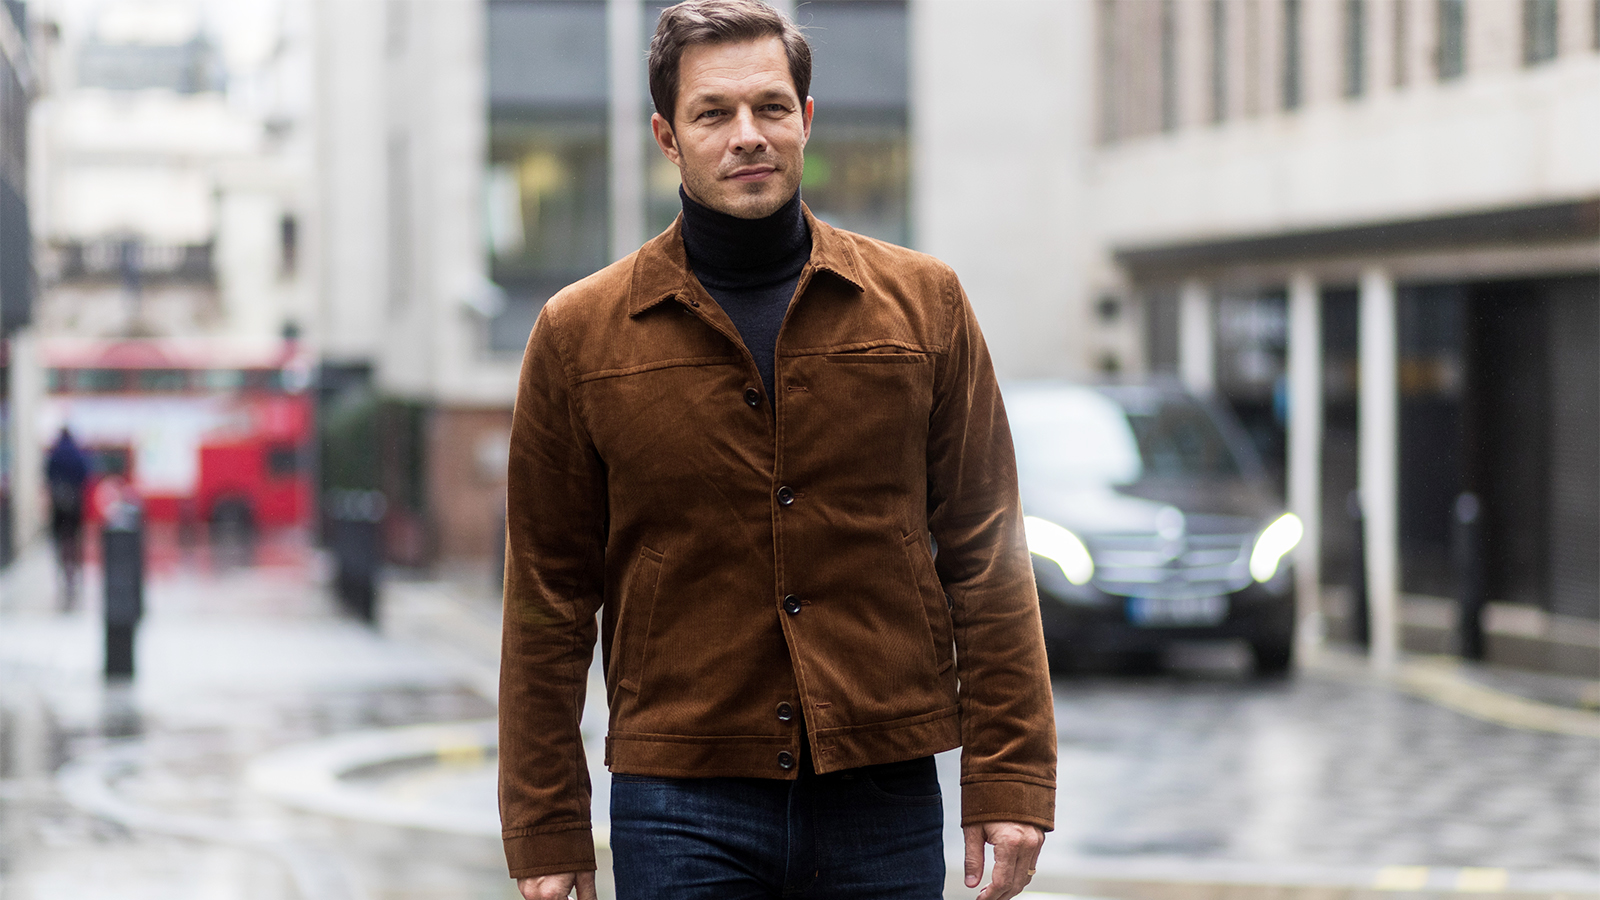 How cords have made a comeback - Paul Sculfer wearing brown cord jacket